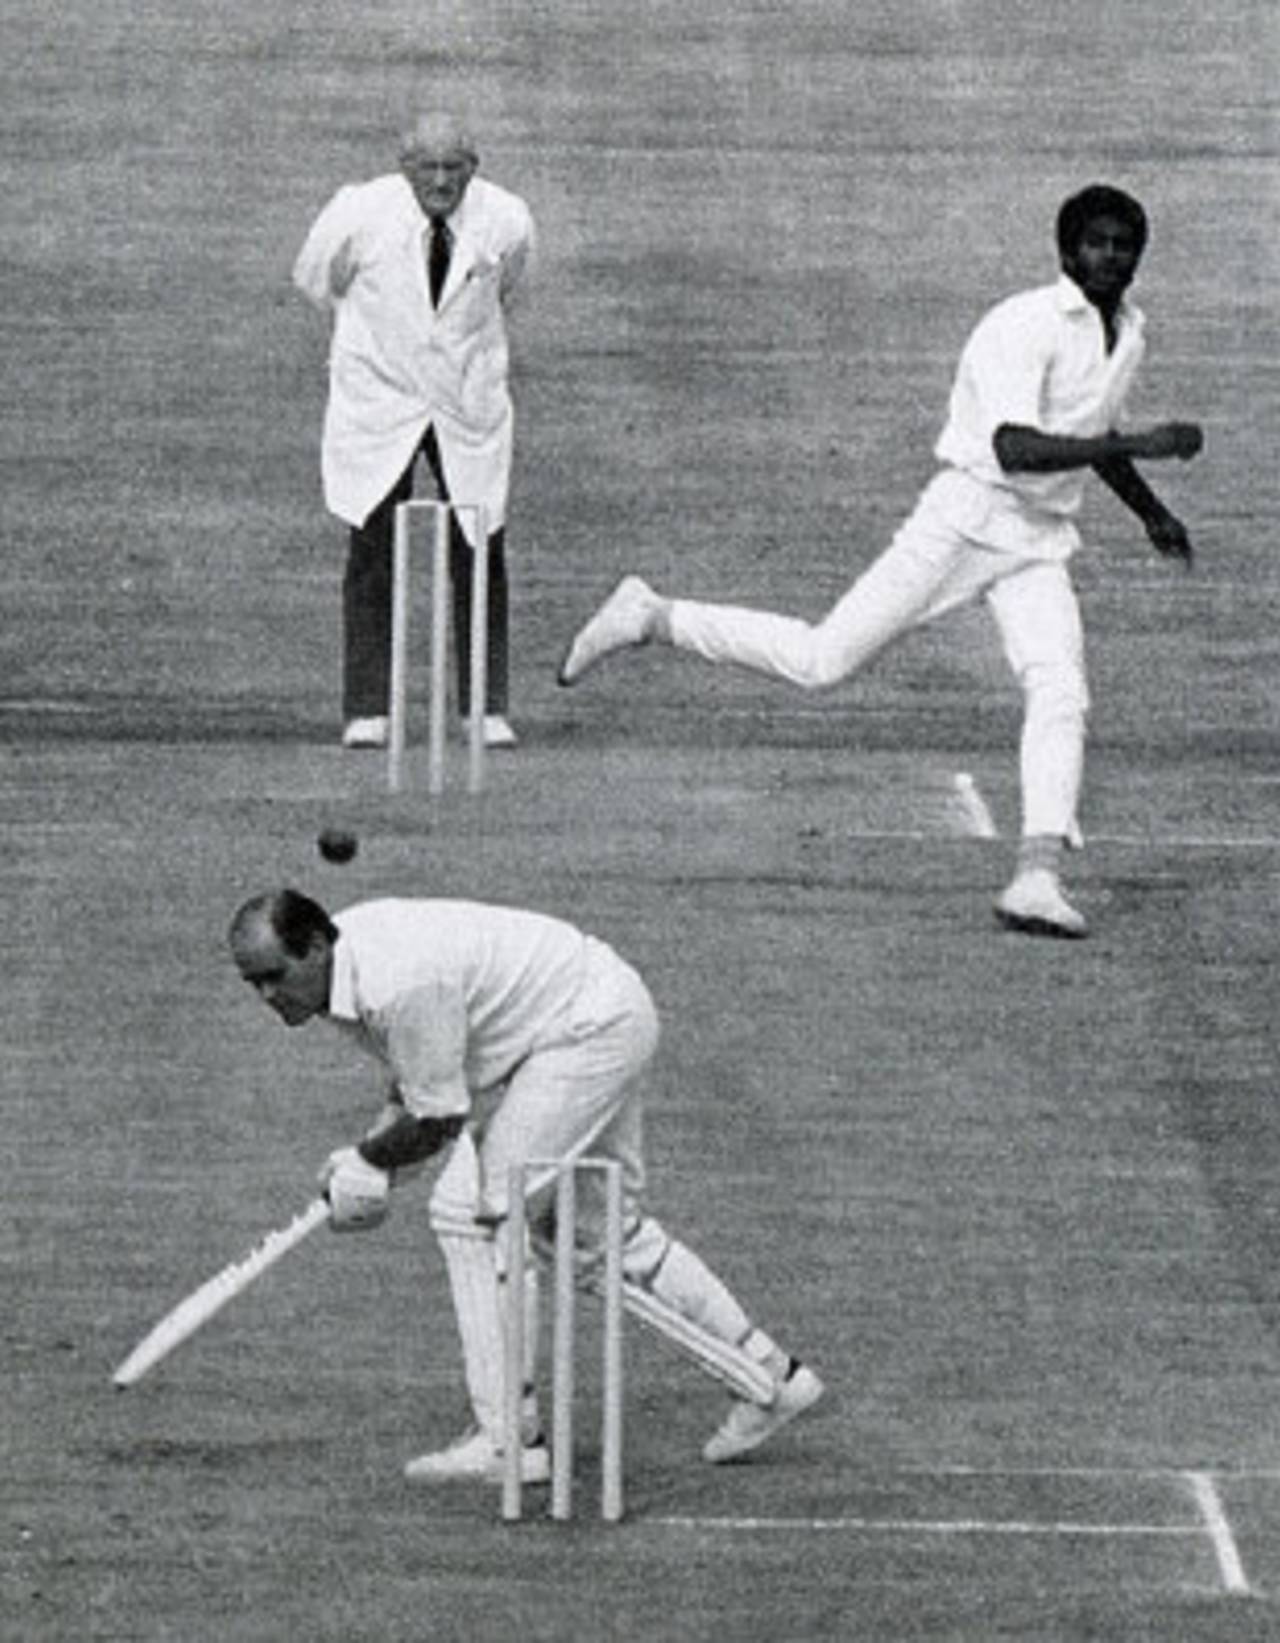 Courage under fire: Close weathers the West Indian barrage in his mid-40s&nbsp;&nbsp;&bull;&nbsp;&nbsp;The Cricketer International